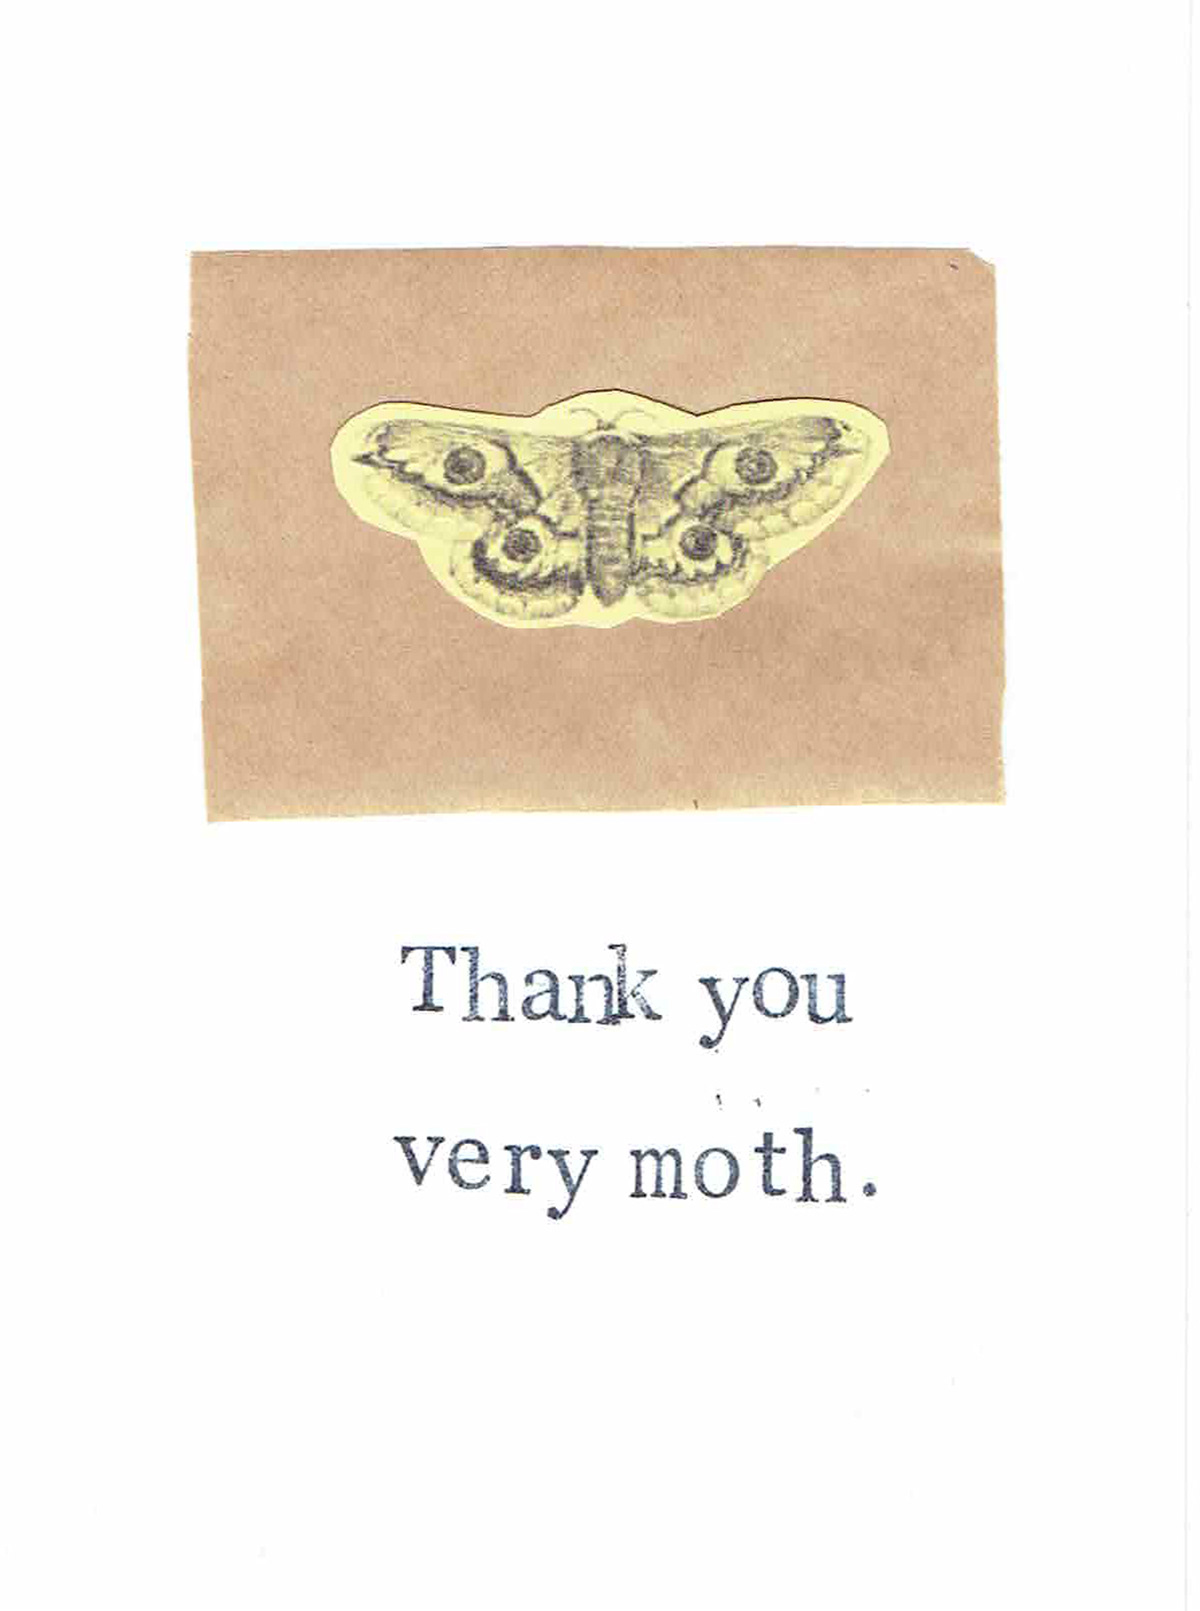 natural history biology science funny humor Victorian STEAMPUNK Nature animals etsy greeting cards cards Birthday collage Stationery